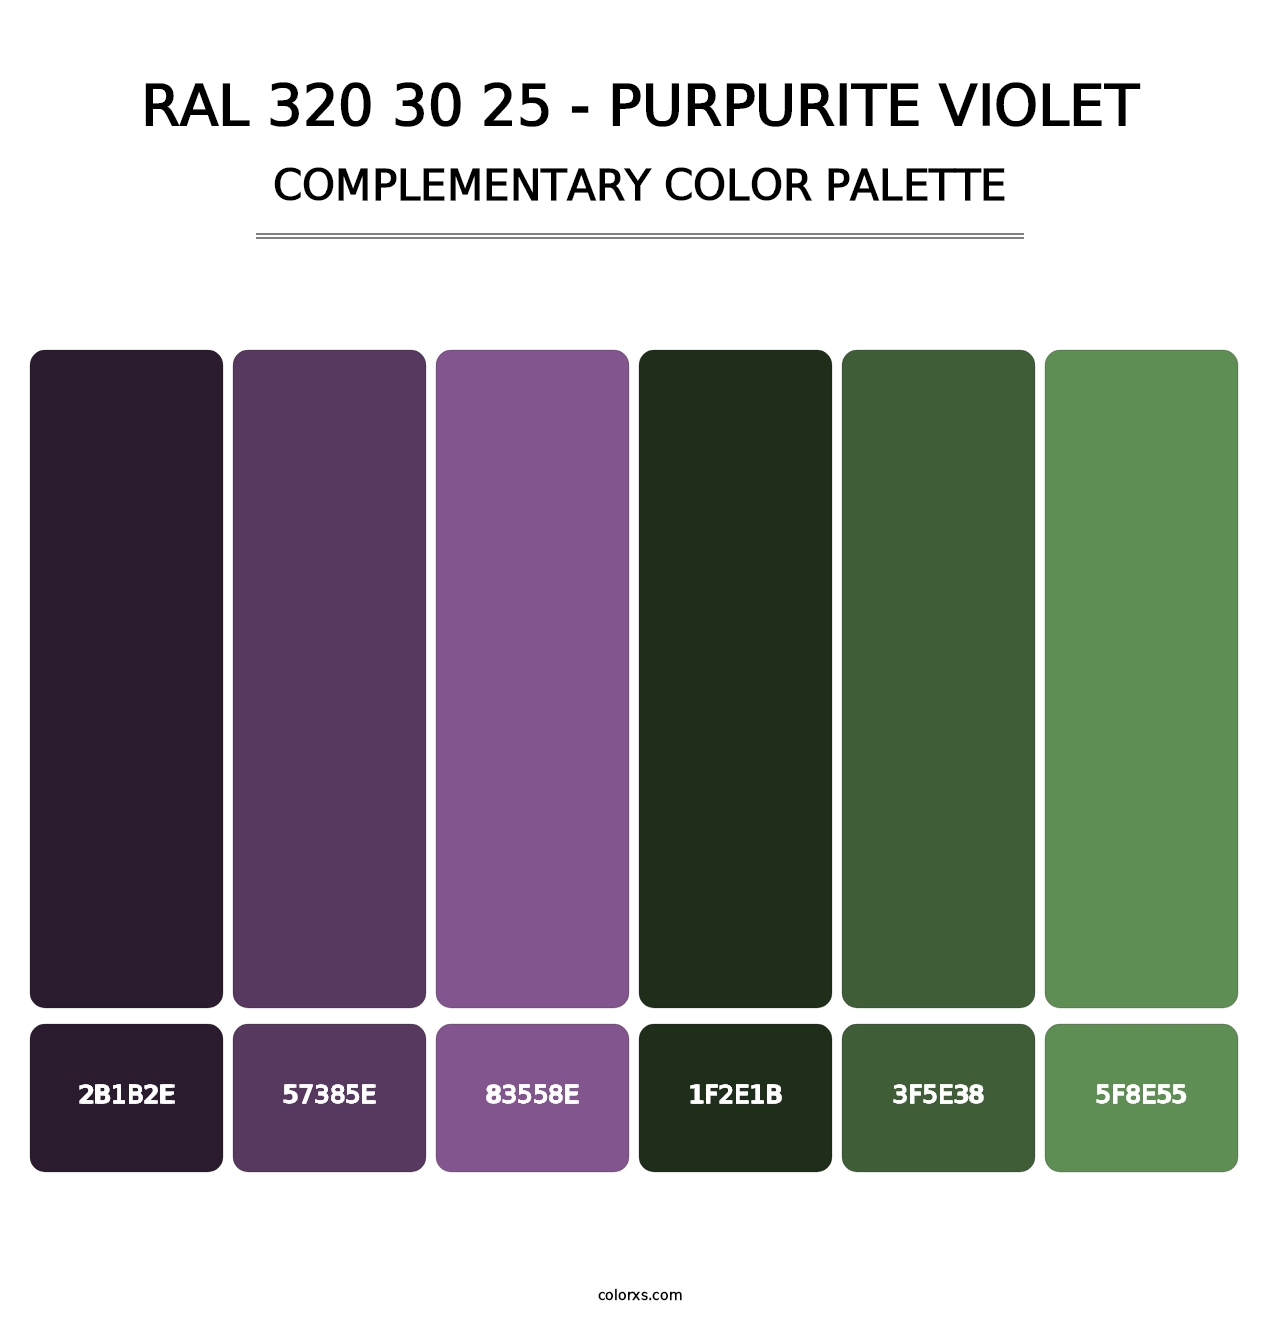 RAL 320 30 25 - Purpurite Violet - Complementary Color Palette